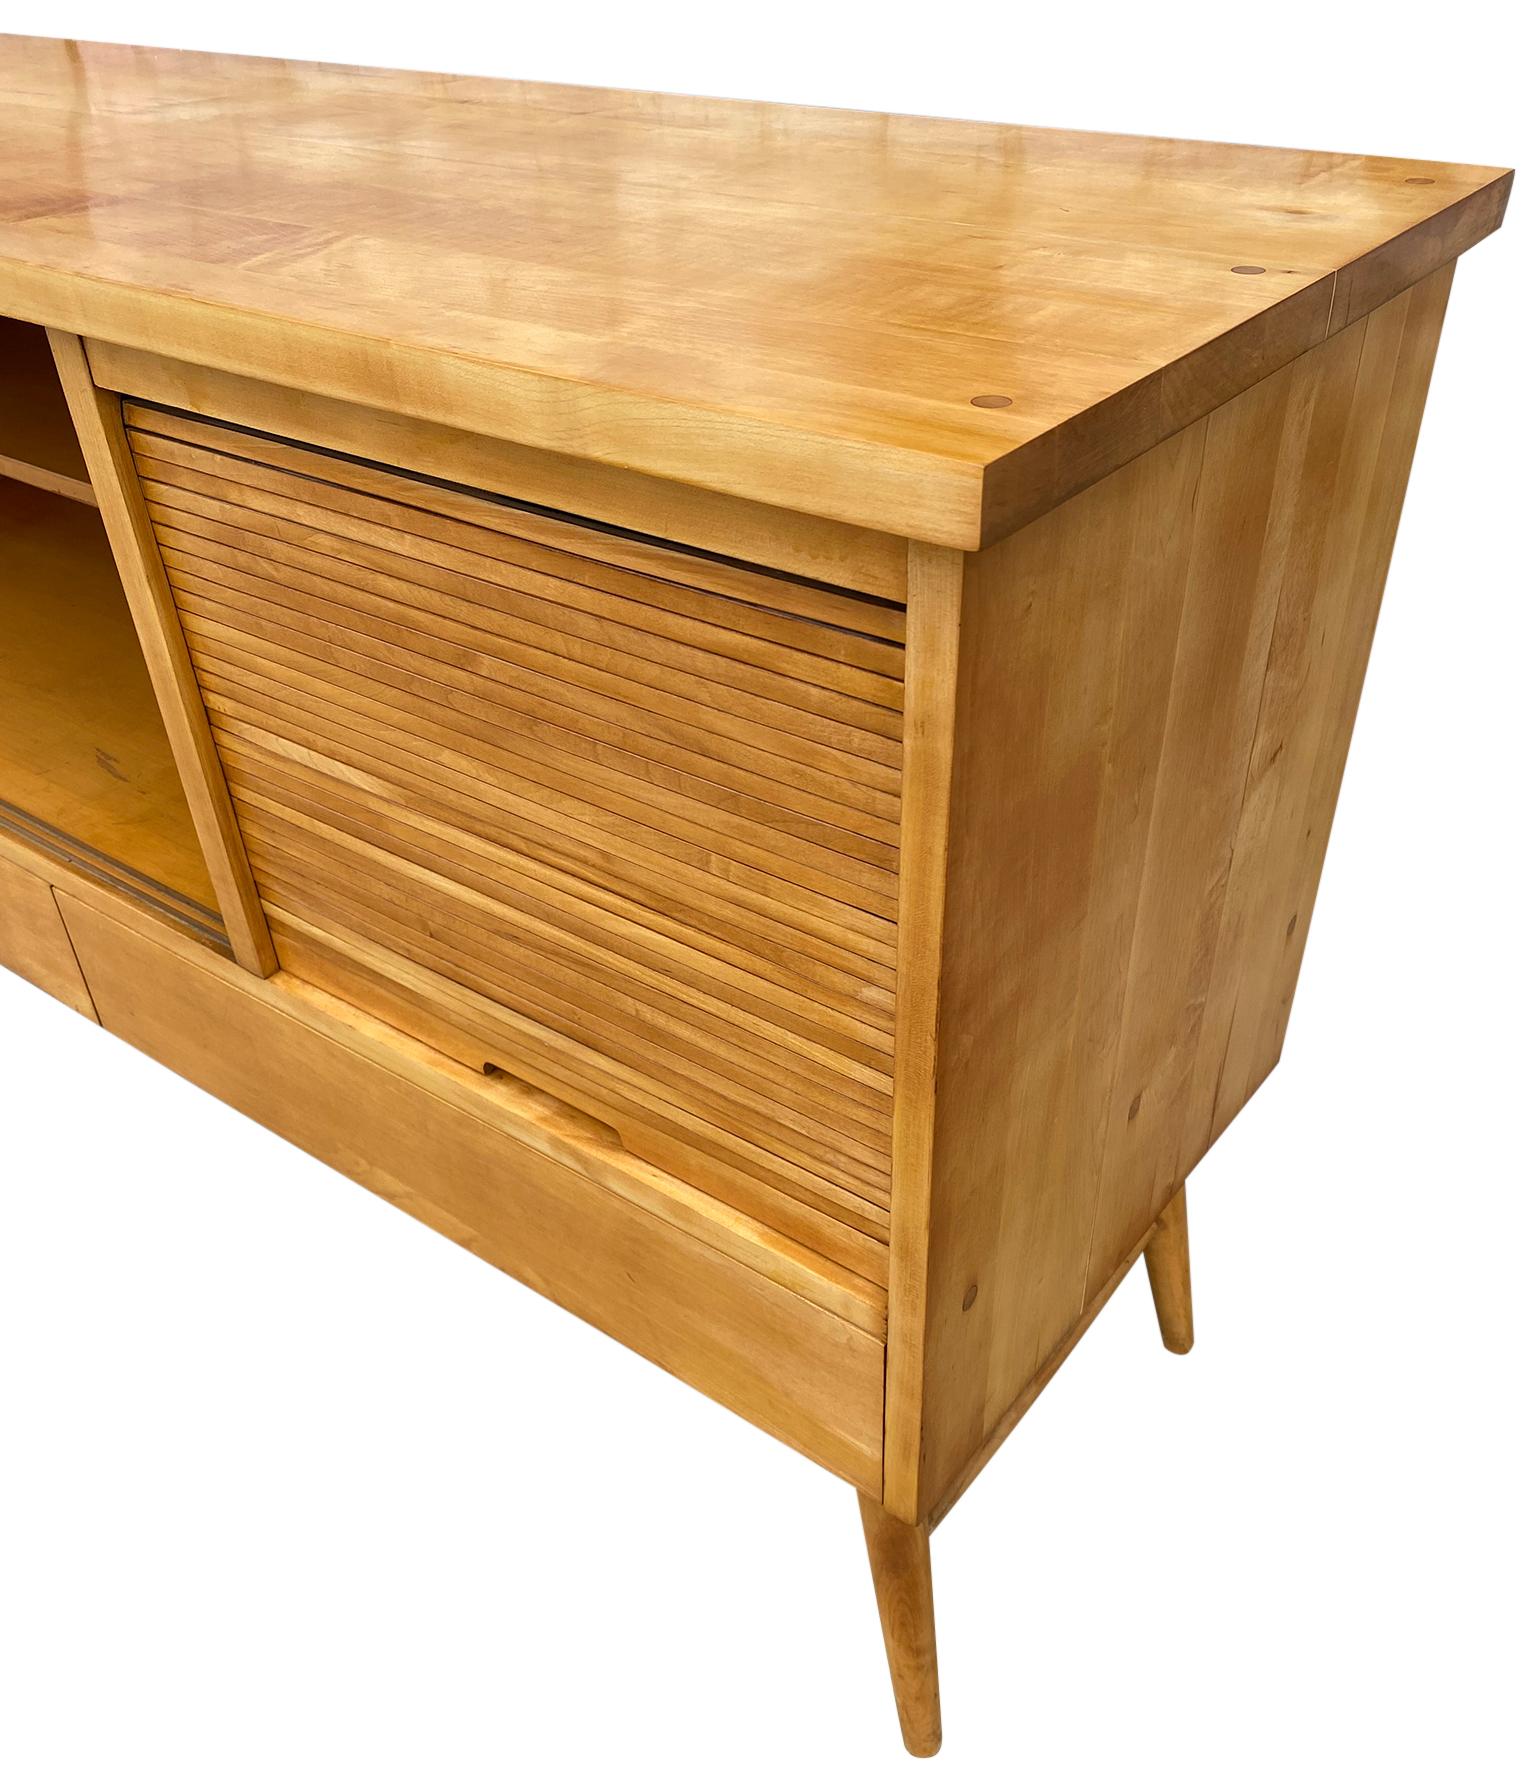 Very Rare Mid-Century Modern Maple Predictor Credenza by Paul McCobb for O’hearn For Sale 8